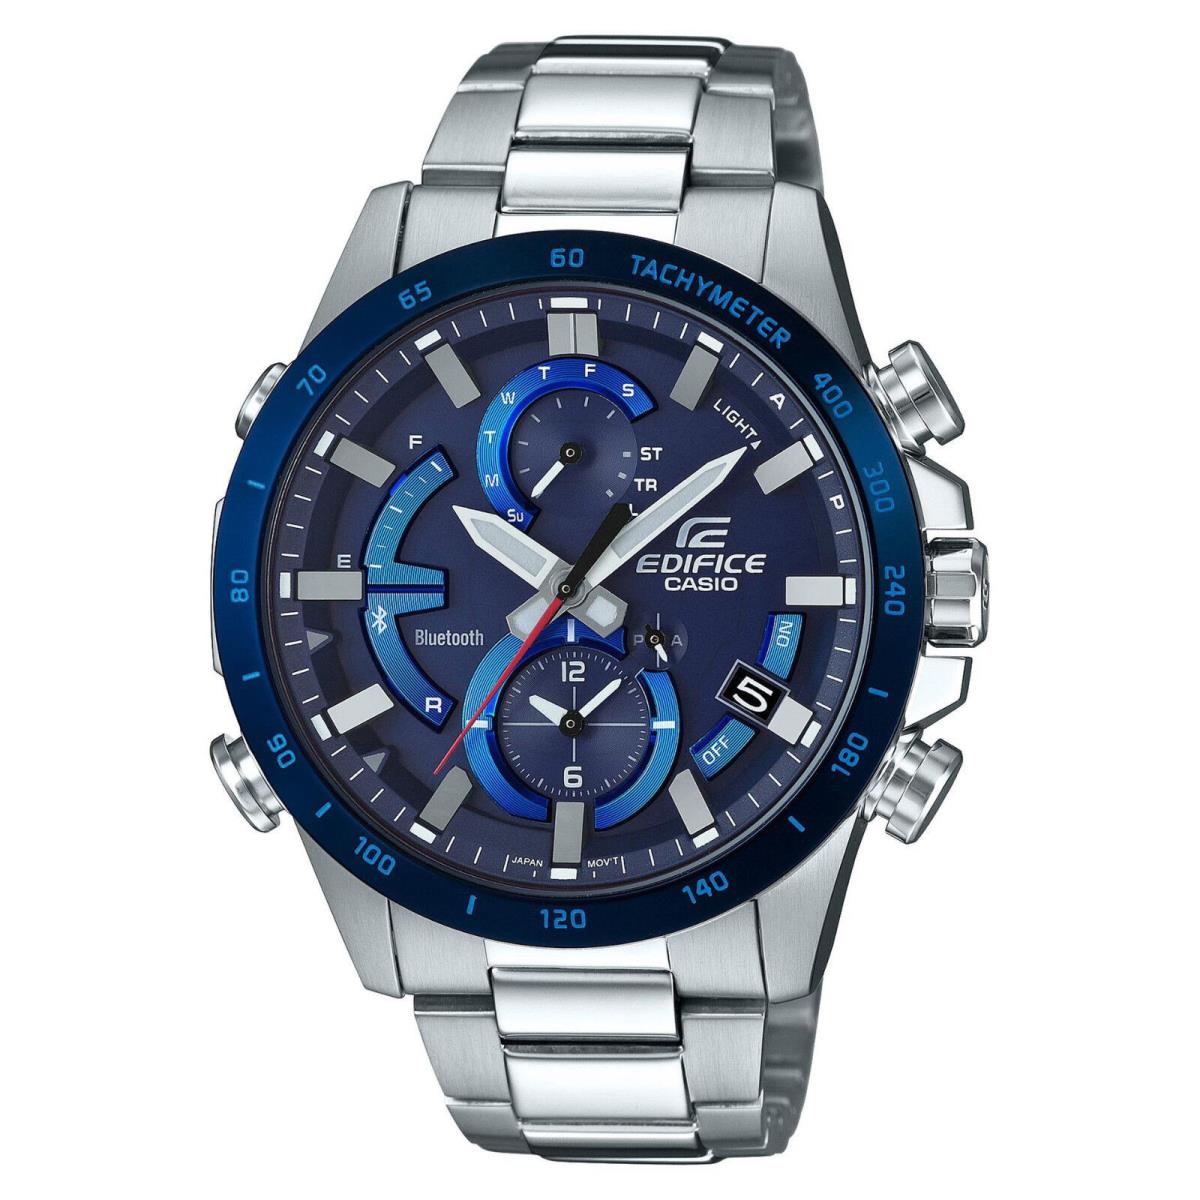 Casio Edifice EQB900DB-2A Smartphone Link Solar Power Stainless Steel Mens Watch - Blue Dial, Silver Band, Blue Manufacturer Face